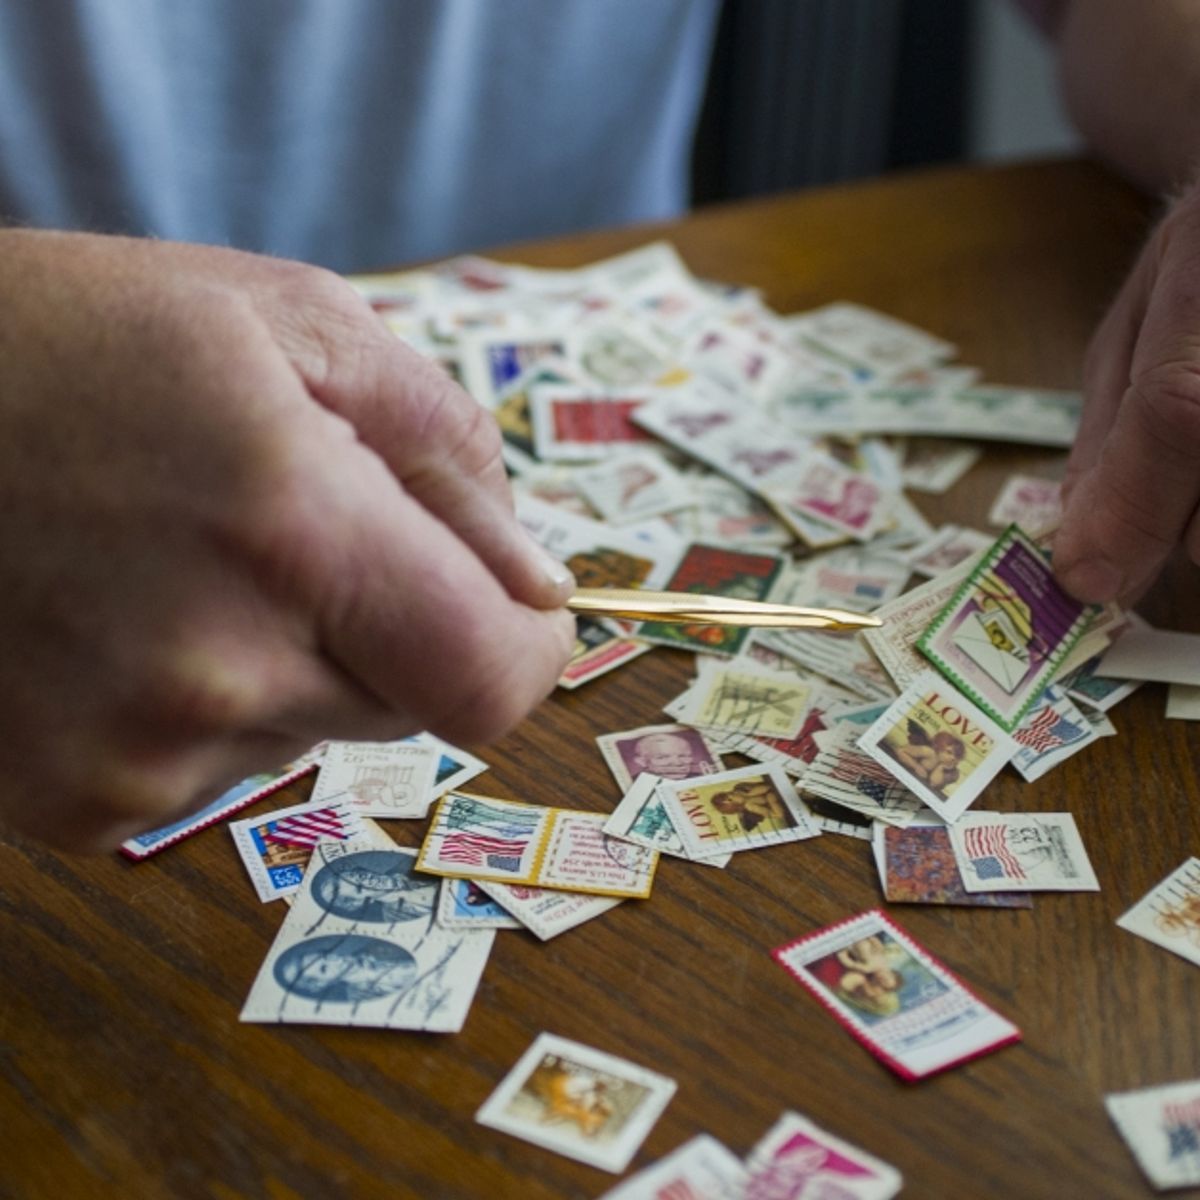 Fake Forever stamps scamming people out of money